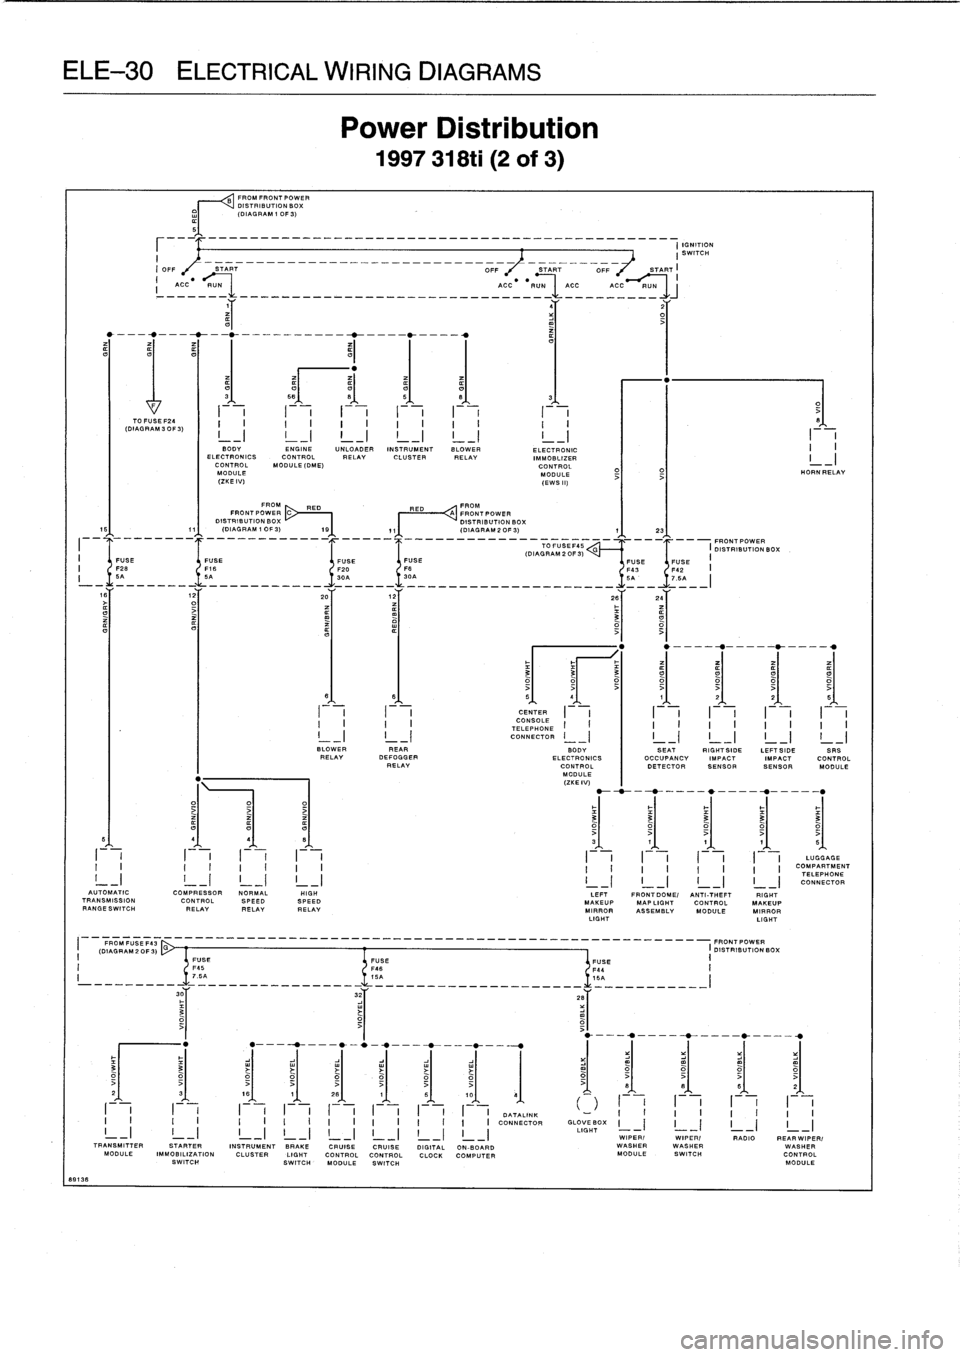 BMW 318i 1997 E36 Owners Guide 
ELE-30
ELECTRICAL
WIRING
DIAGRAMS

I
ACC
-R=_
____-____-______________
ACC
-
RUN

	

ACC
-_-C~

4Y

	

2Y

I

	

I

TO
FUSE
F24
(DIAGRAM
30F
3)

FROM
FRONT
POWER
DISTRIBUTION
BOX
(DIAGRAM
1
0F3)
IGNI